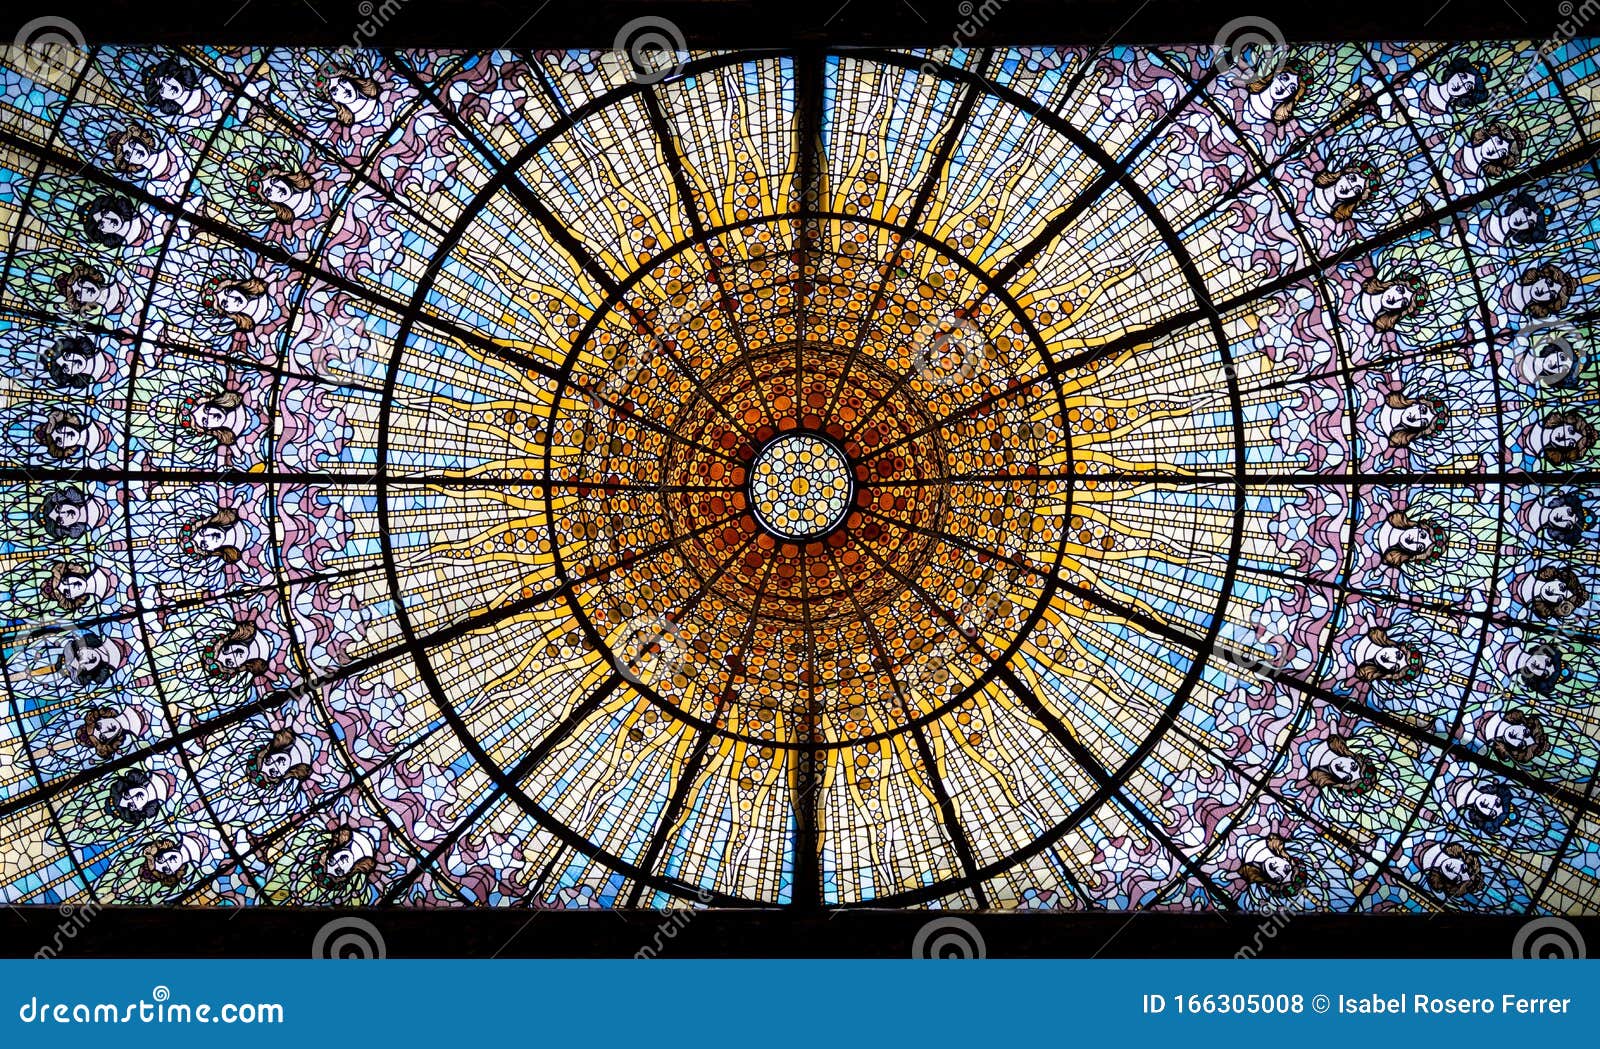 stained-glass skylight of the palau de la musica catalana, concert hall by lluis domenech i montaner. barcelona, catalonia.